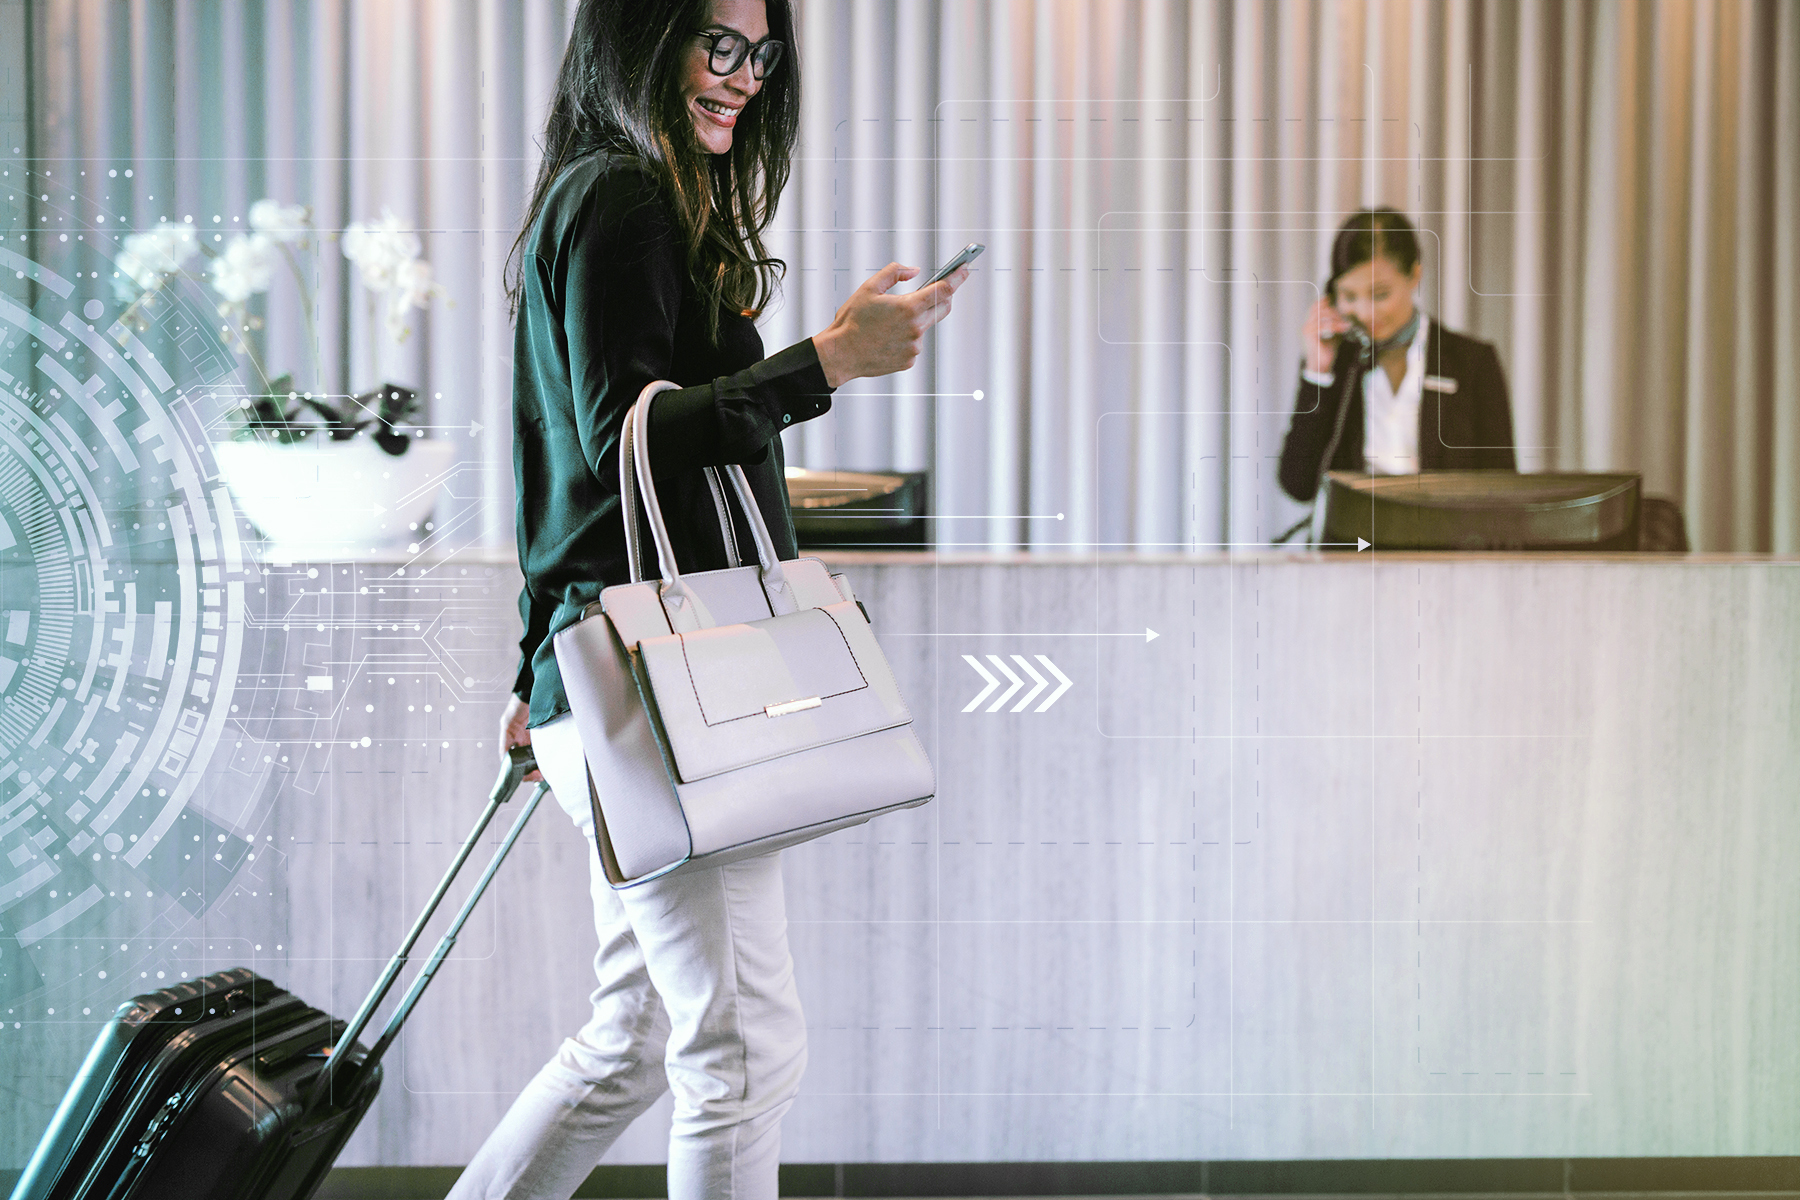 Traveler checking into her hotel room on her phone, simplifying hotel subscription models for a better user experience